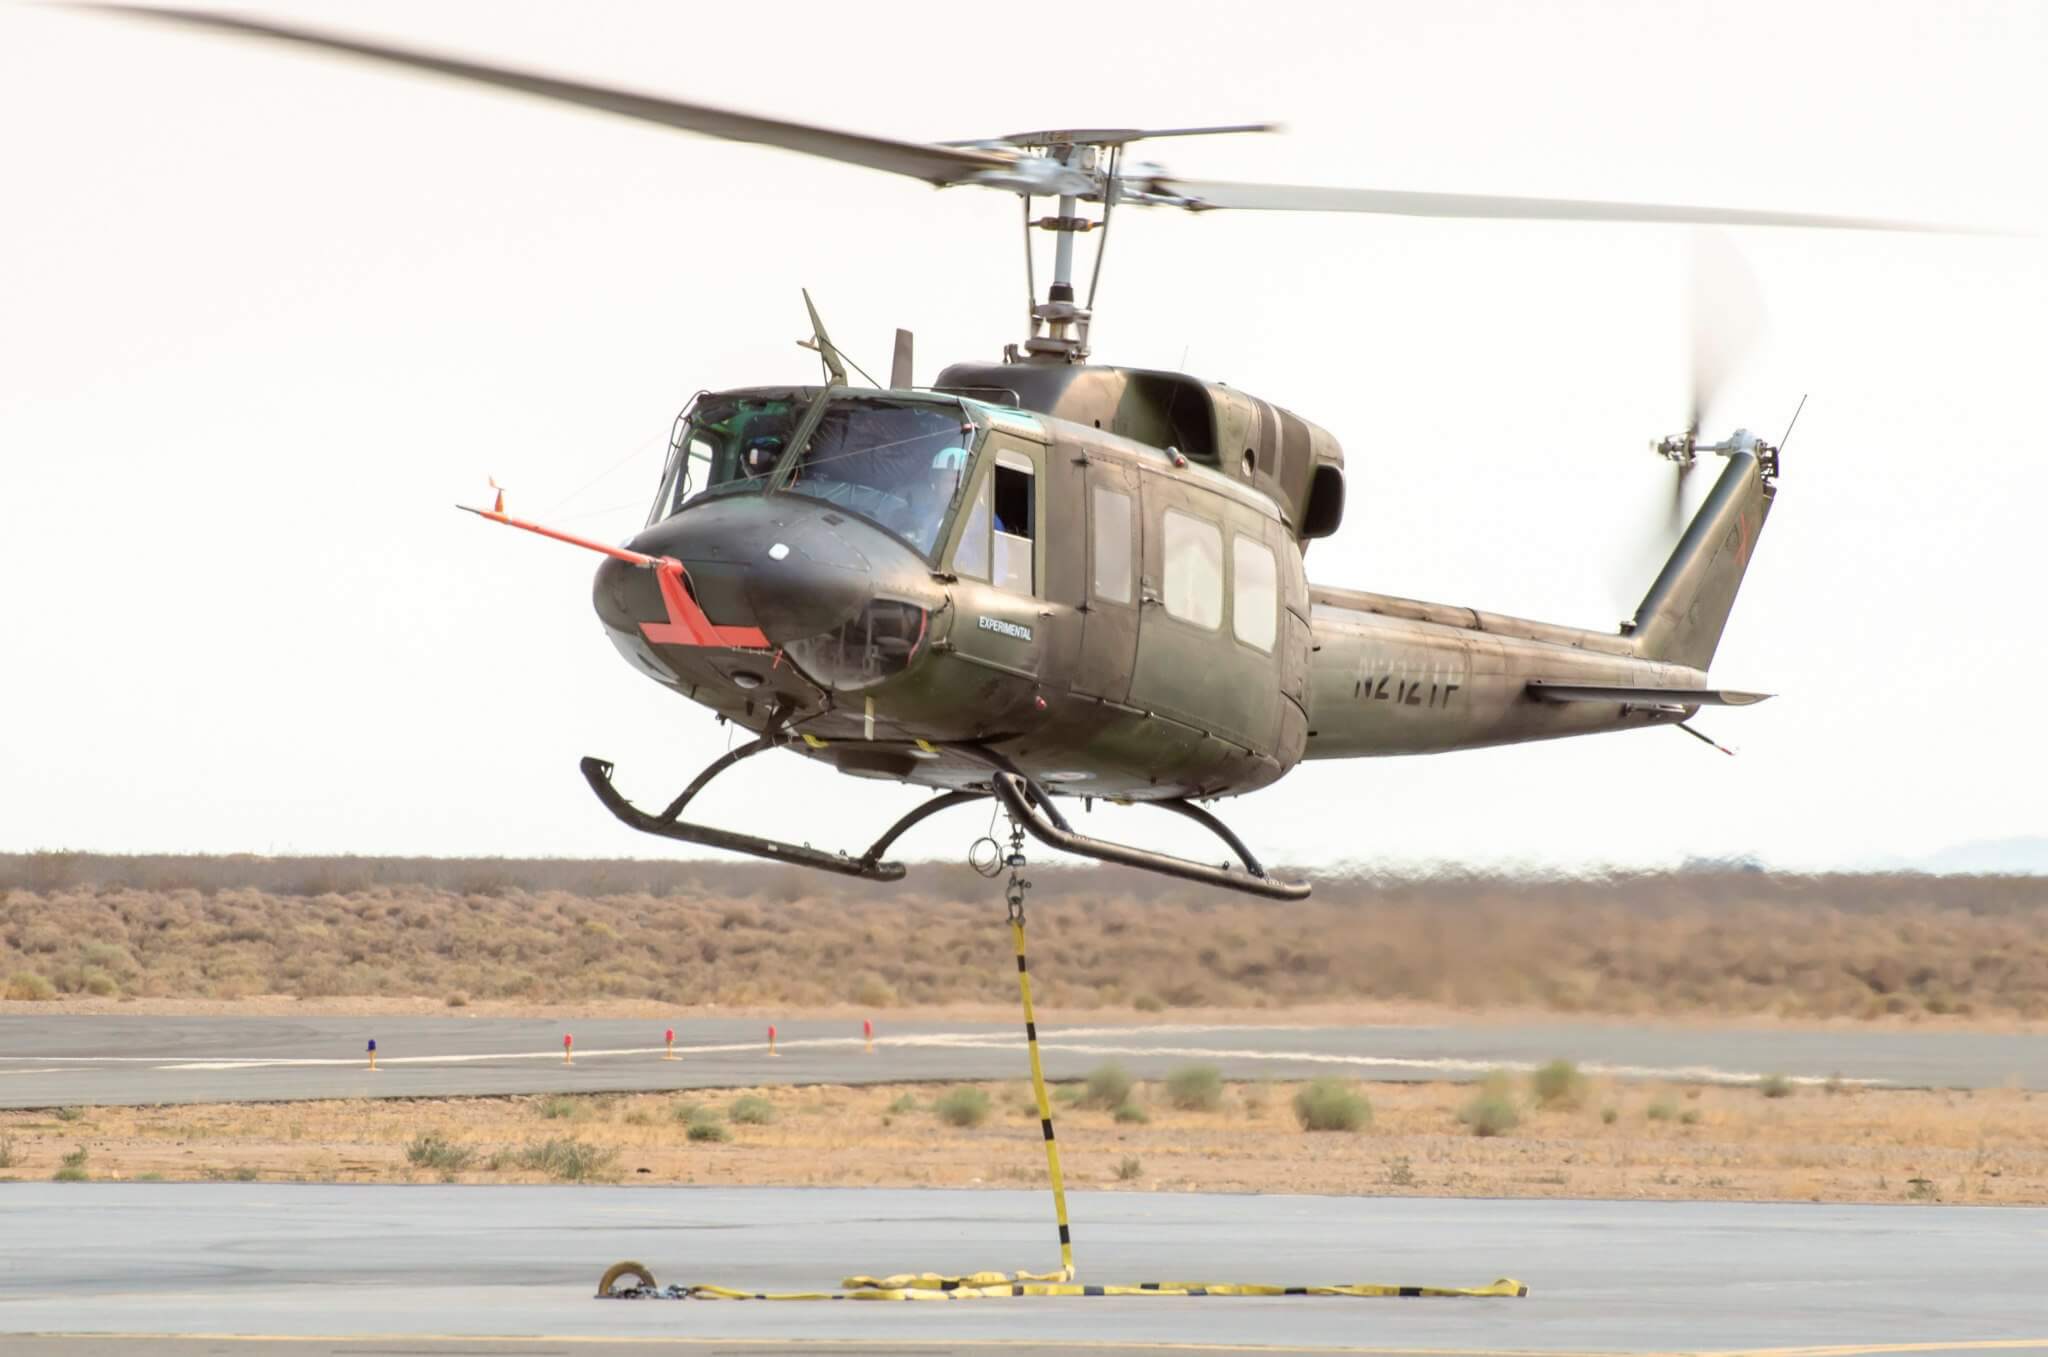 Pilots training in a helicopter at the at National Test Pilot School